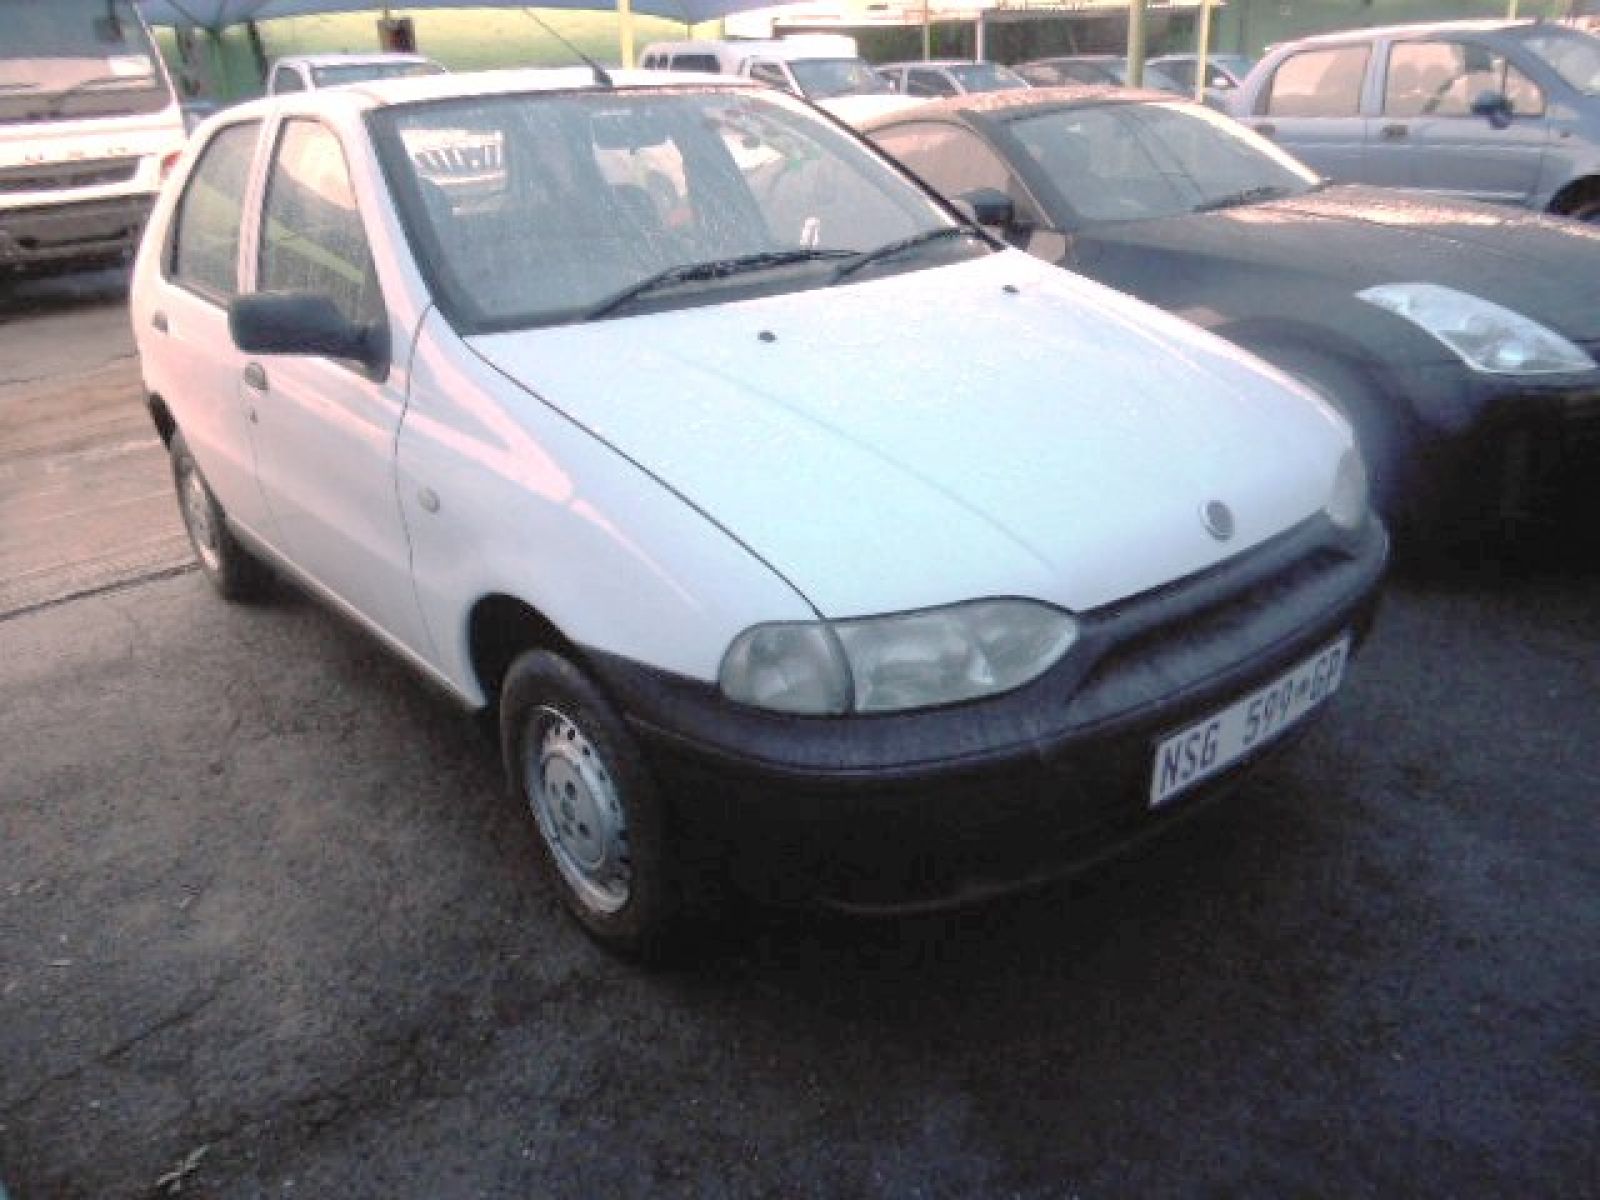 Fiat Palio 1.2 For Sale (New and Used) 